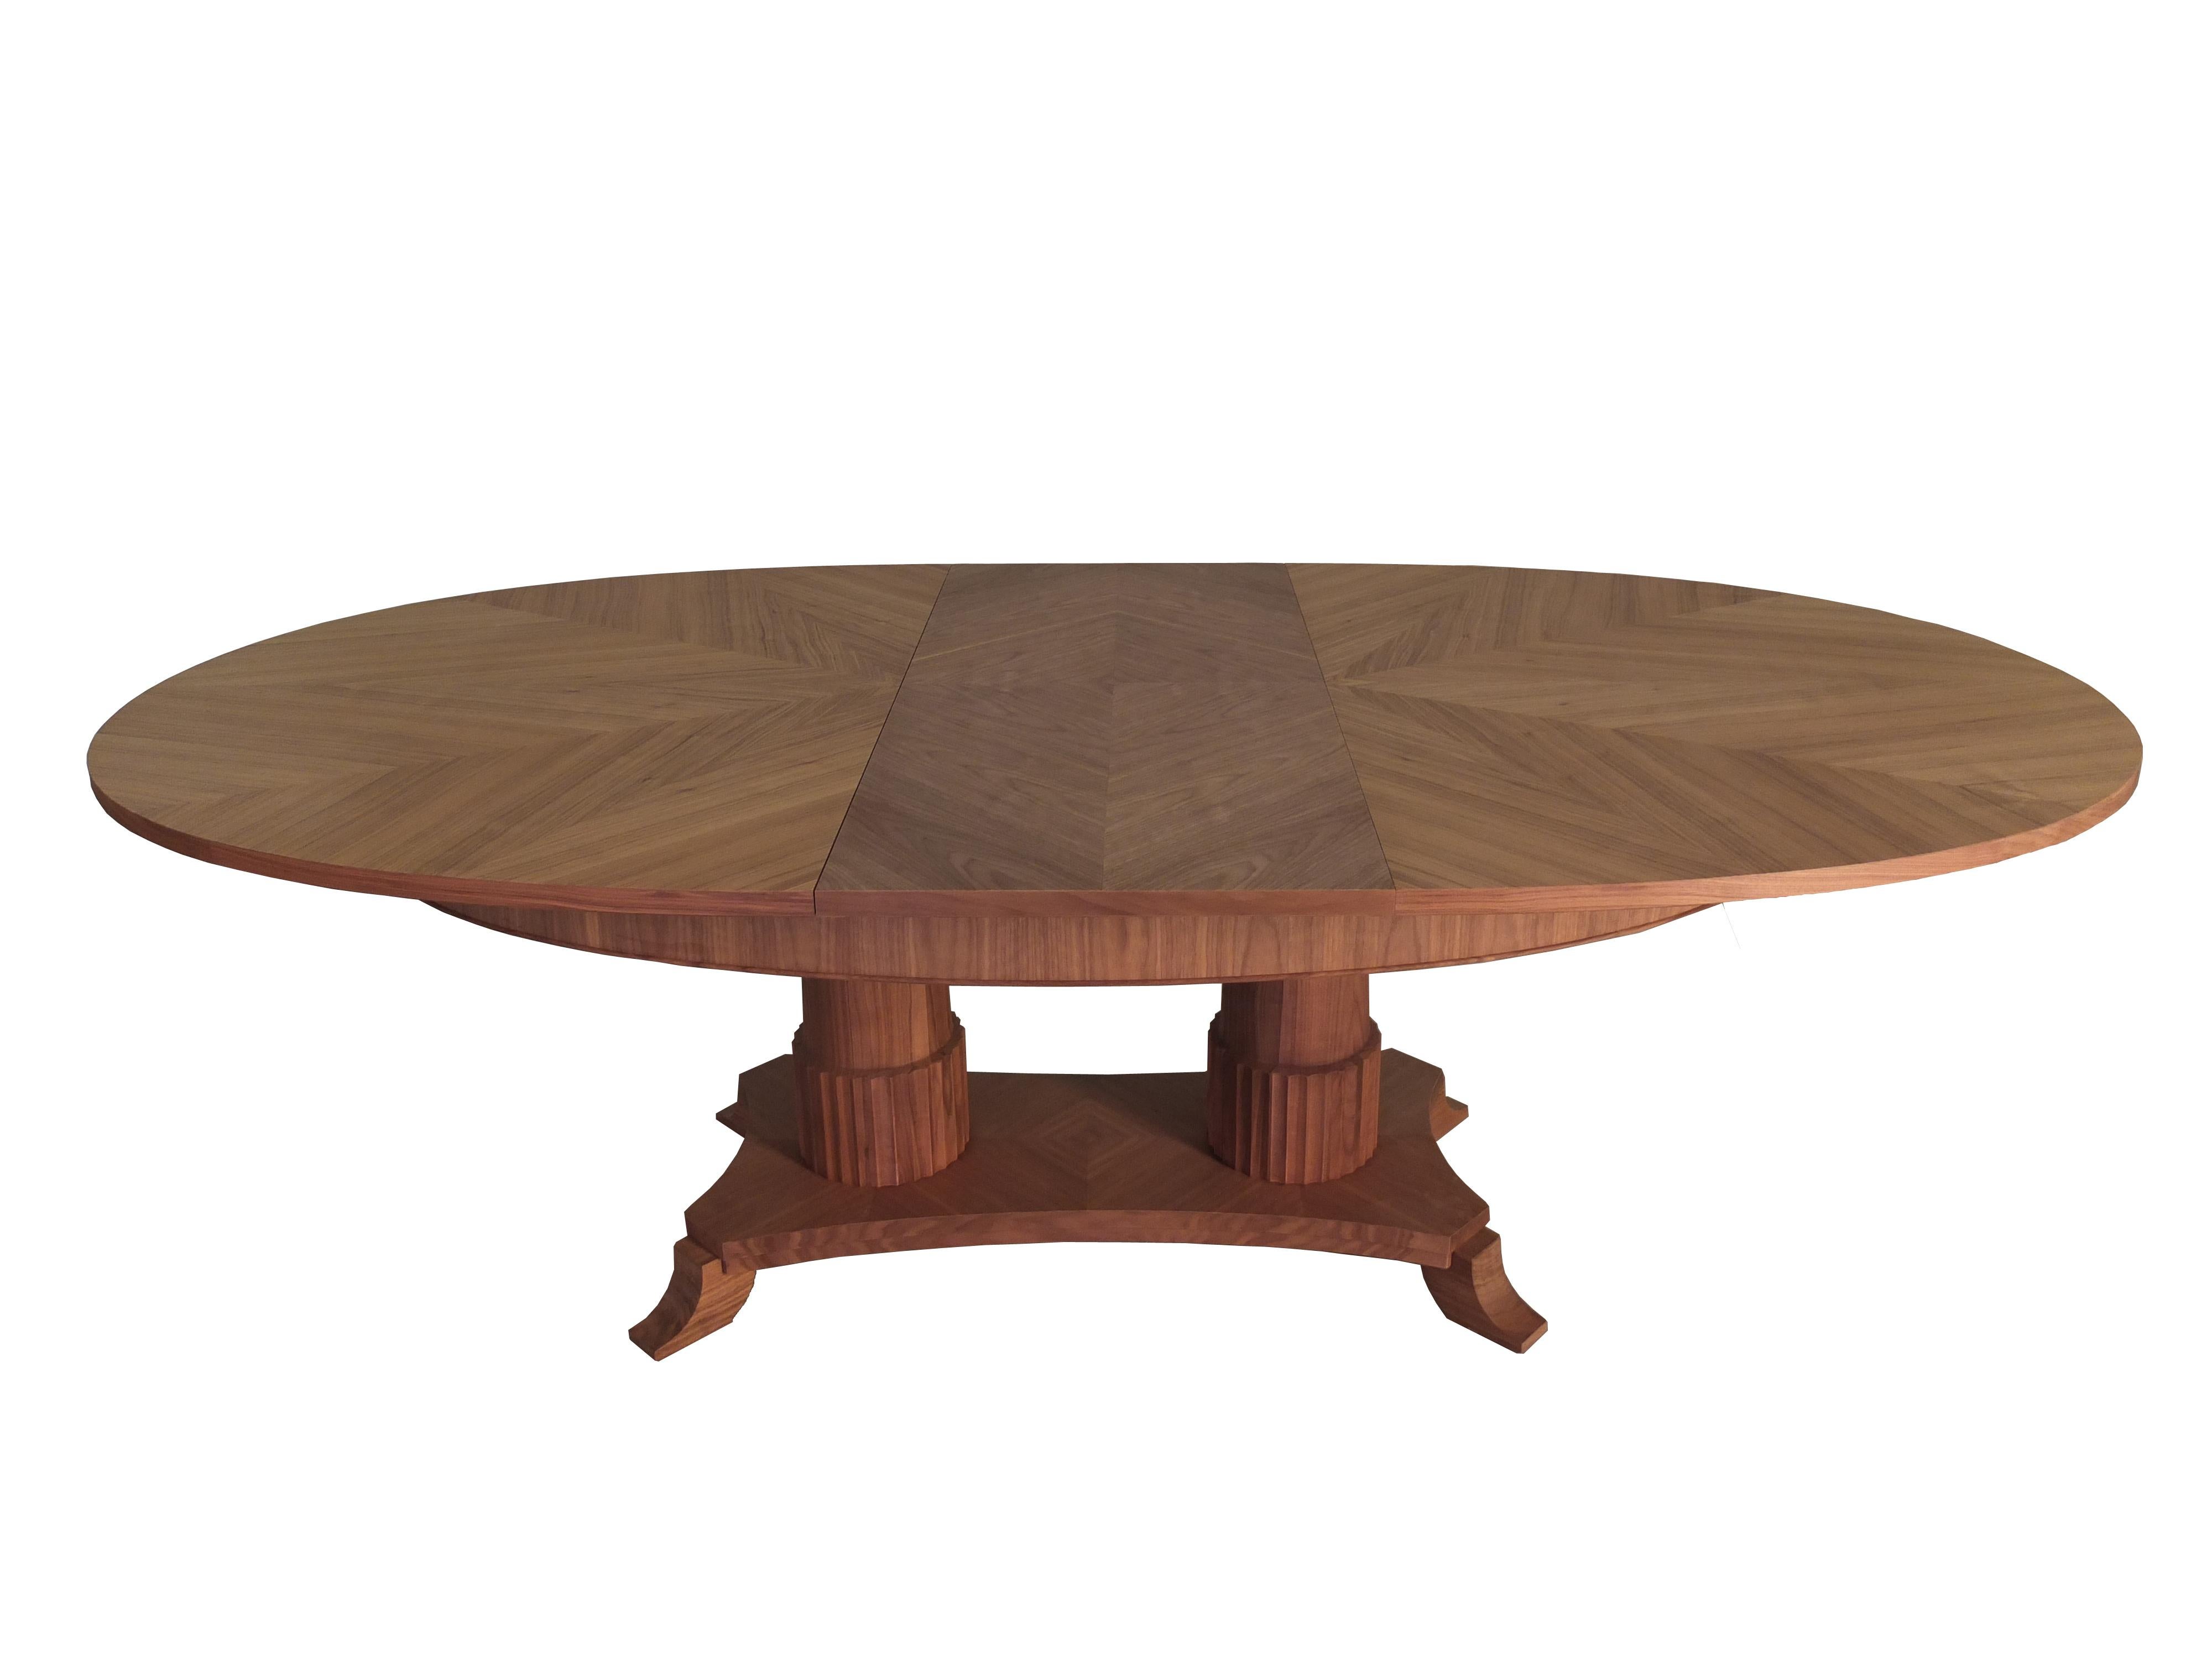 Cherry Contemporary extendable table in Biedermeier style made of cherry wood